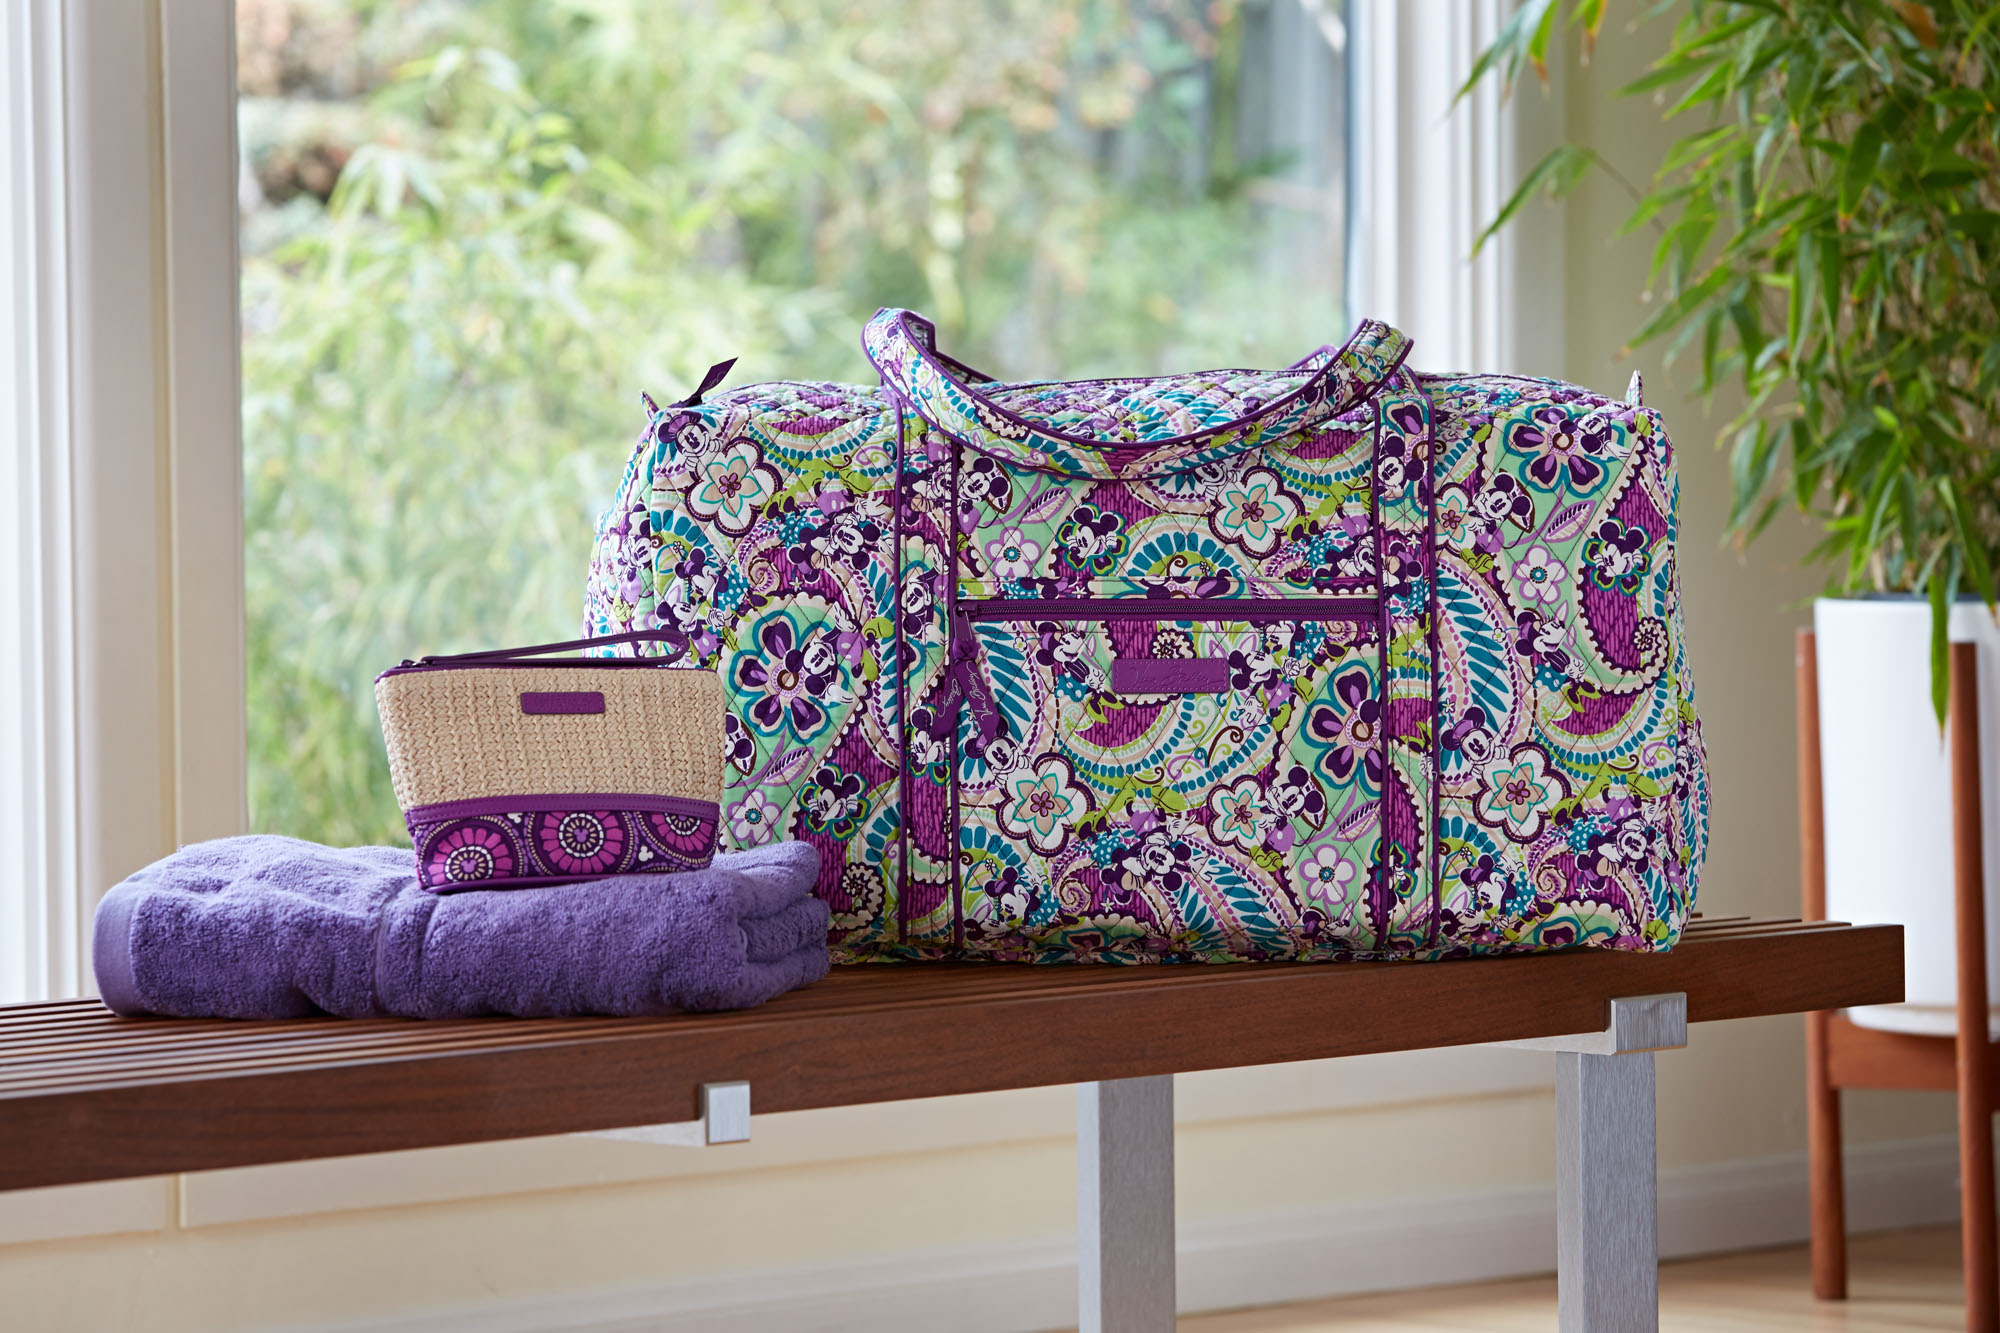 New Vera Bradley Plums Up Collection Coming to Disney Parks for Spring